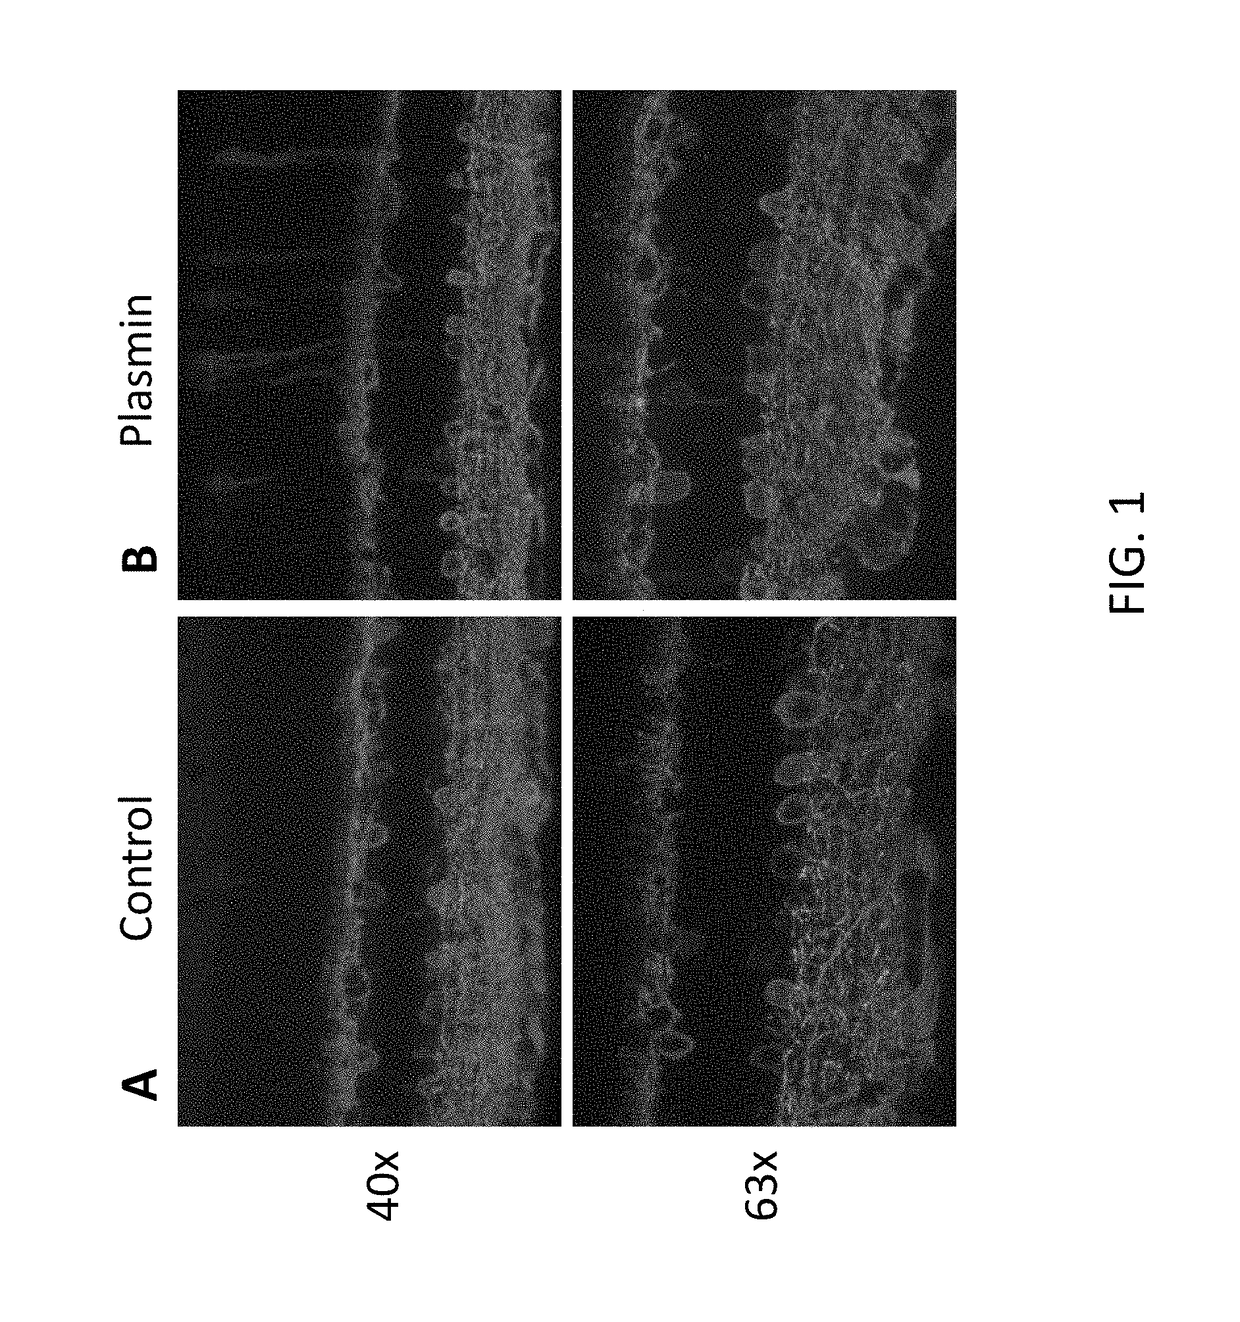 Method of Enhancing Delivery of Therapeutic Compounds to the Eye